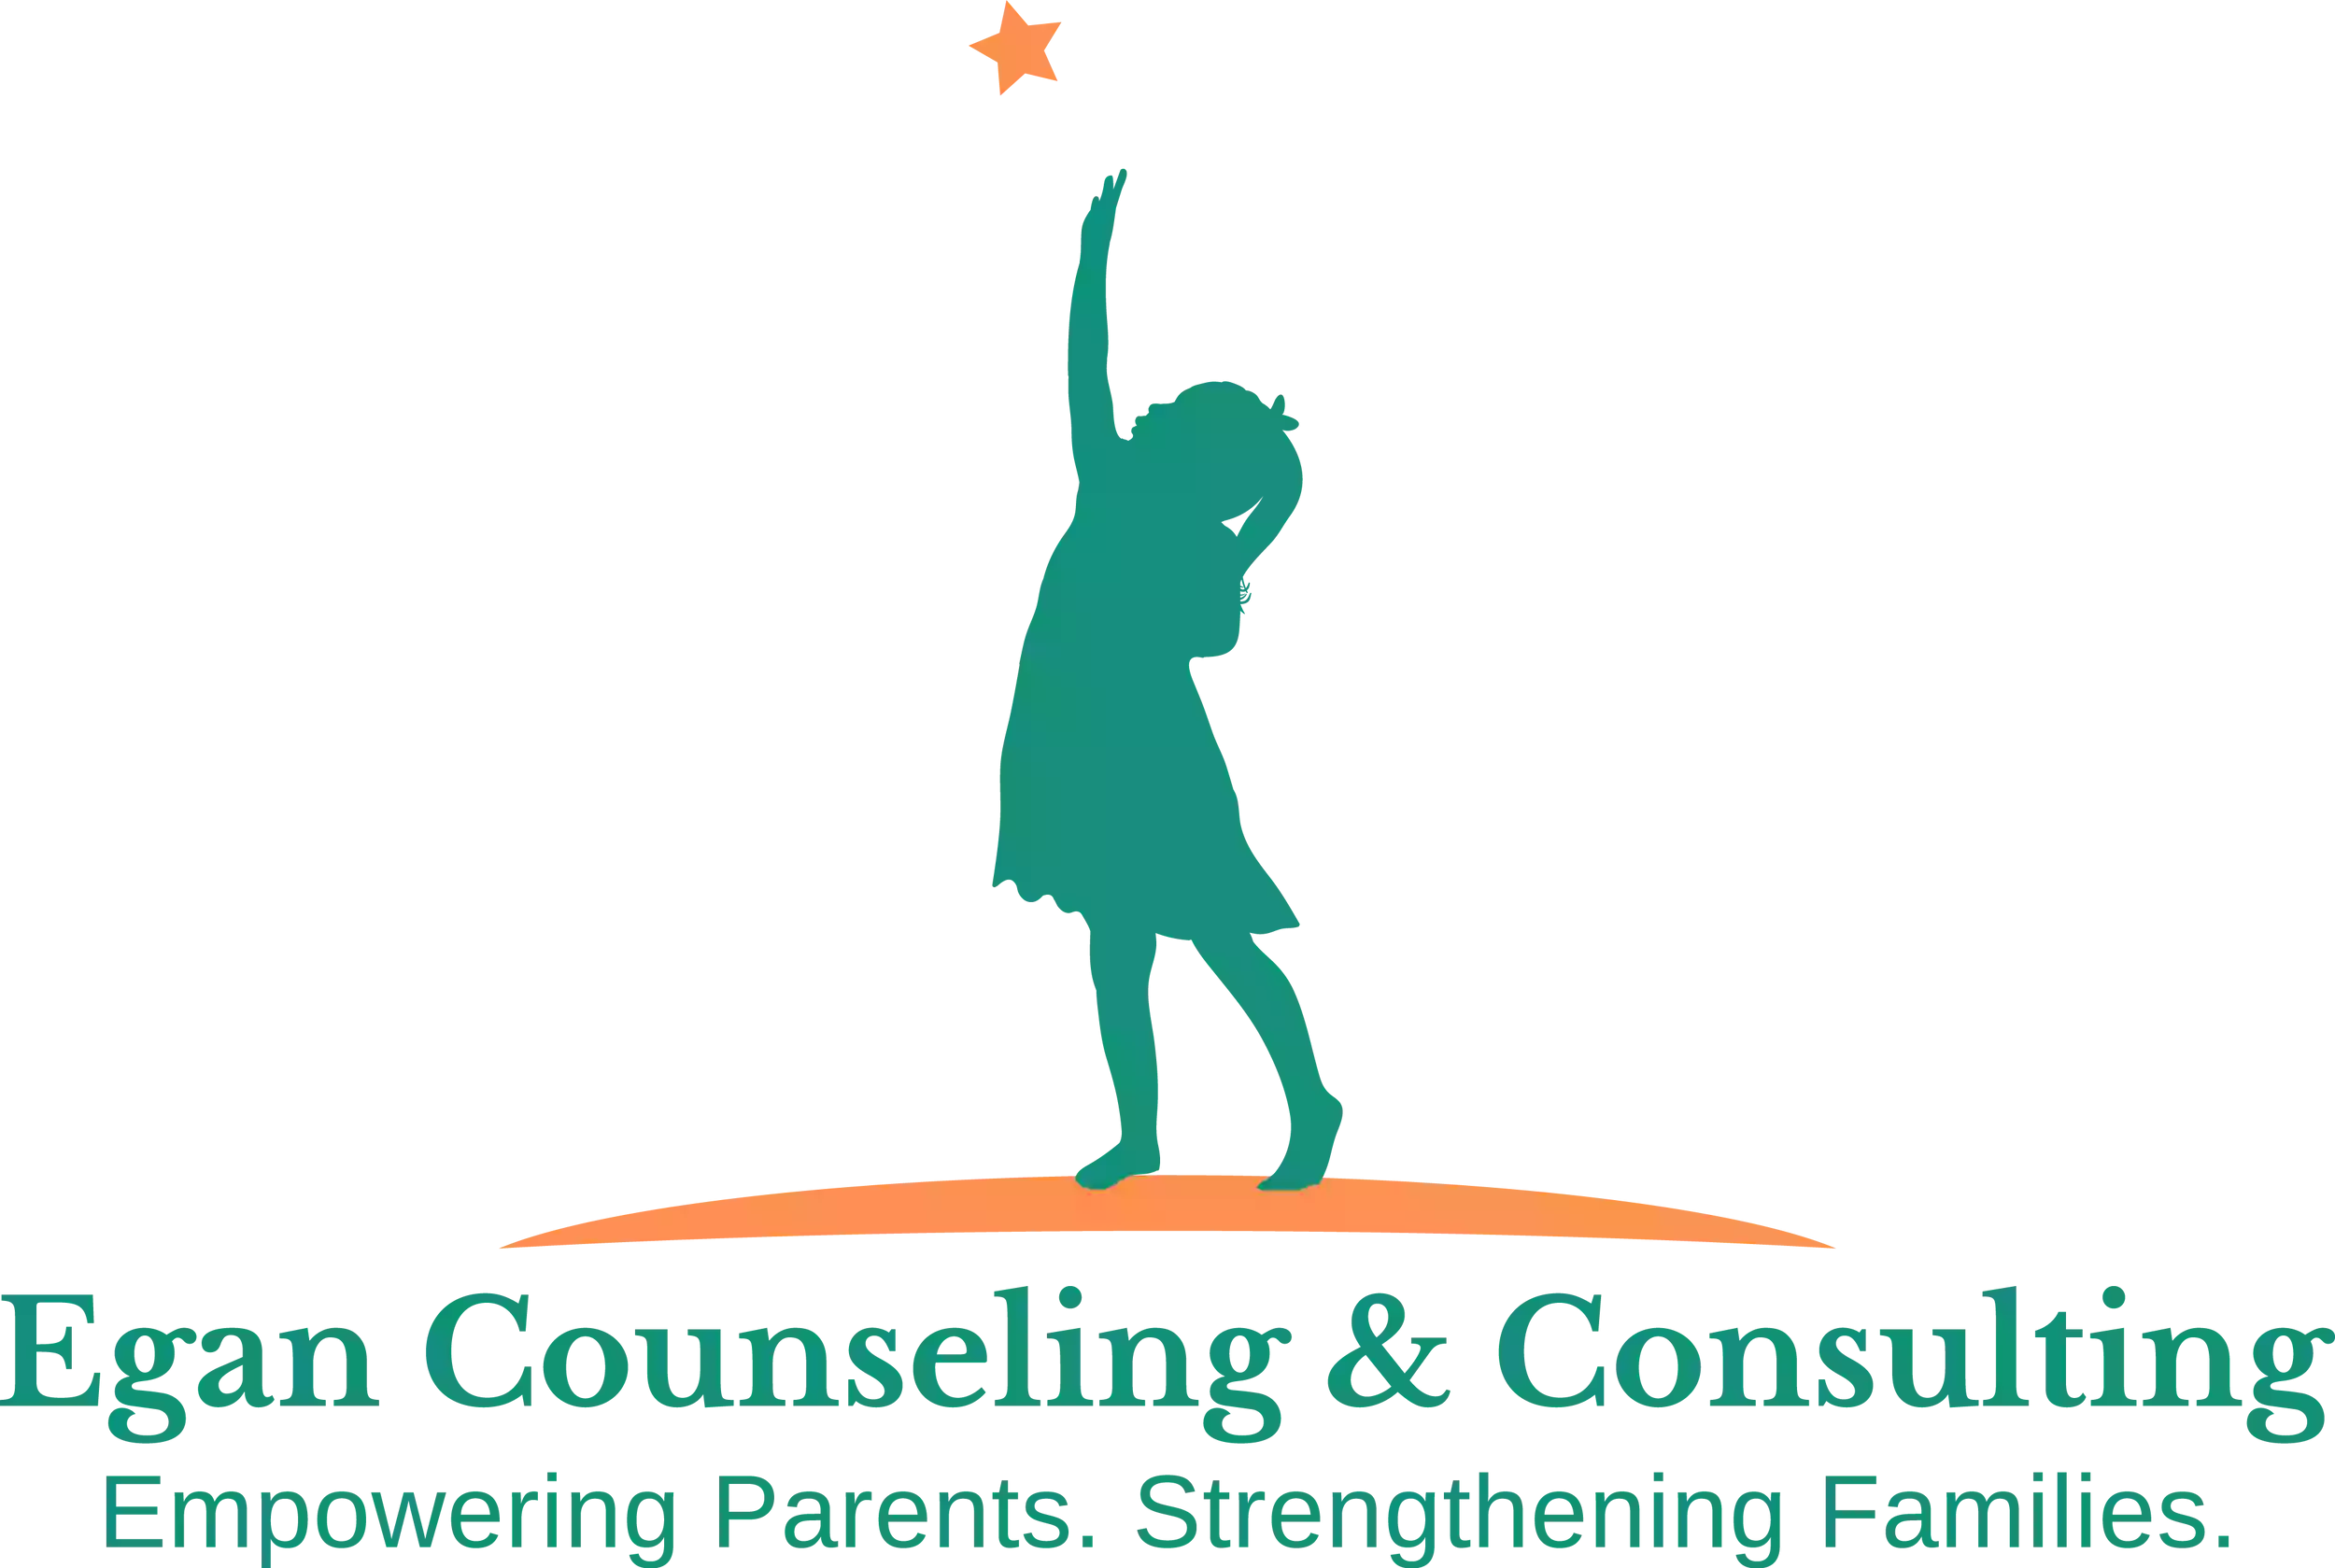 Egan Counseling & Consulting